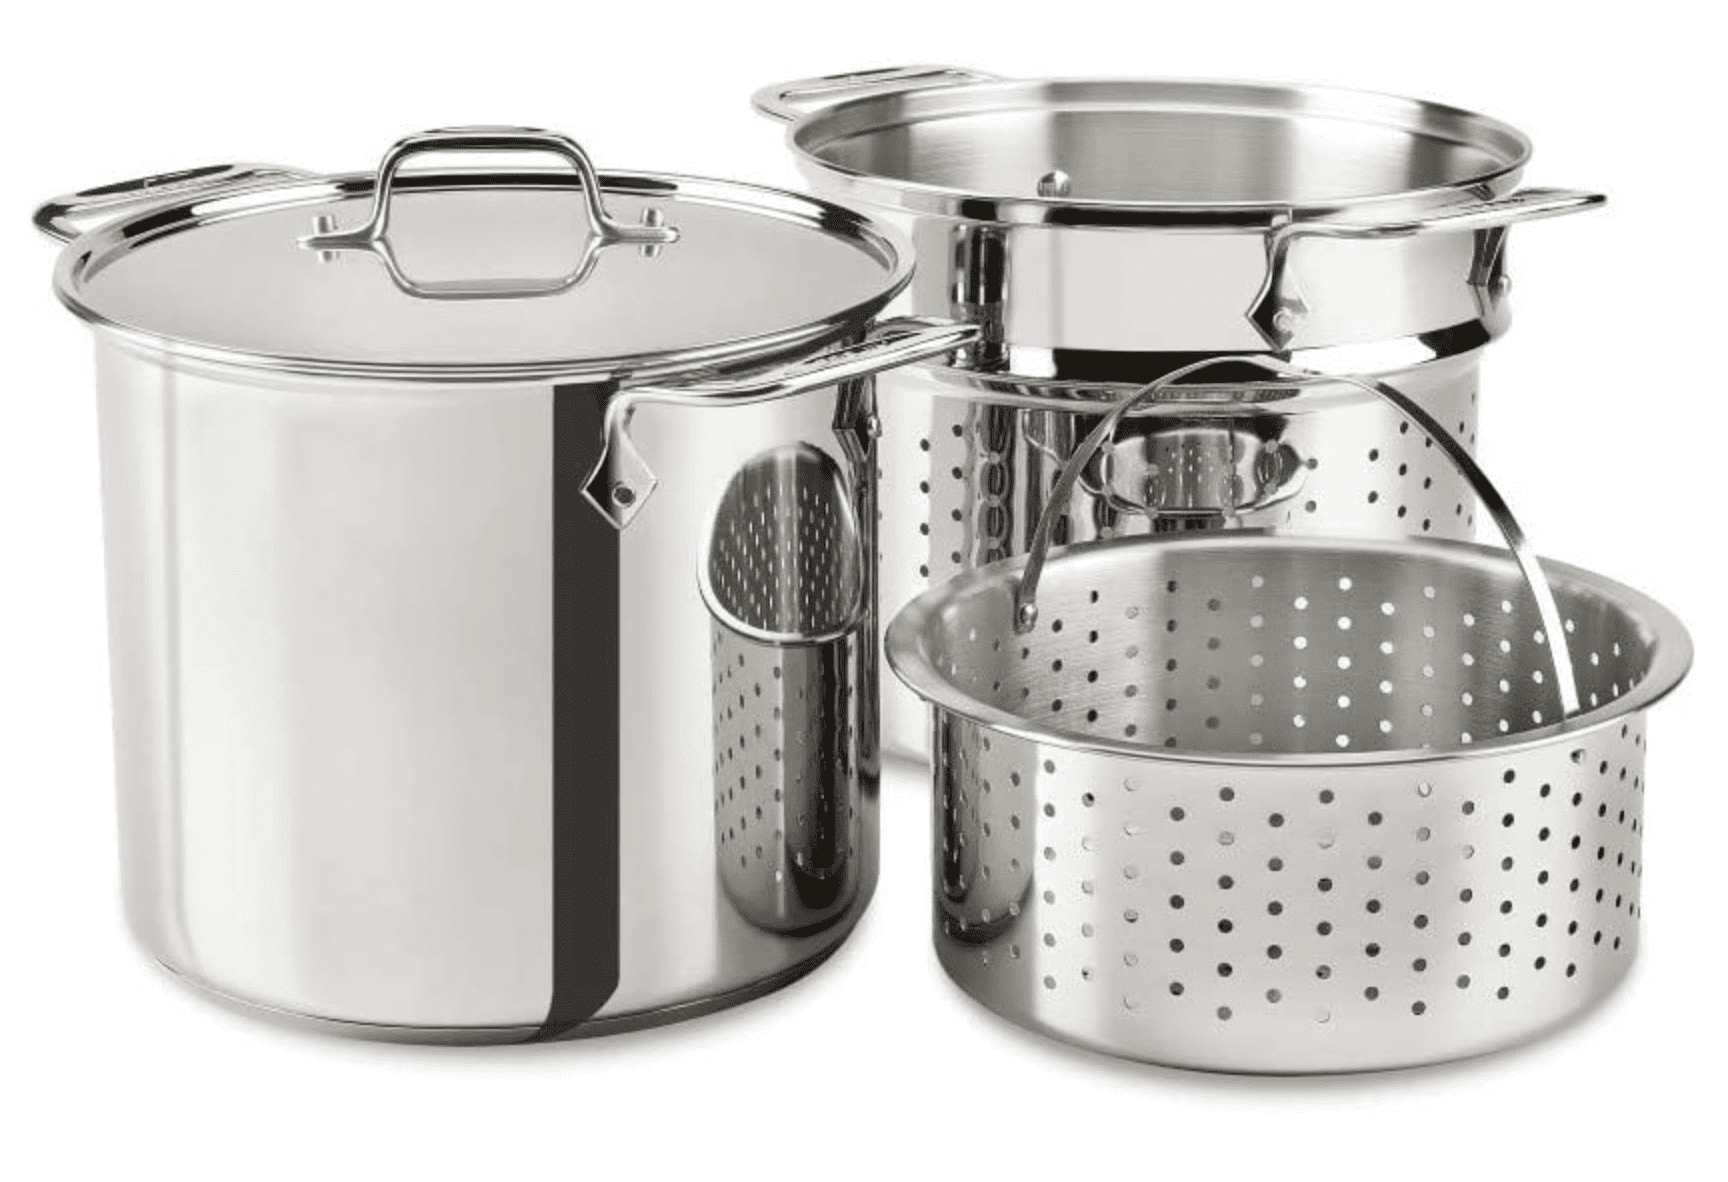 http://cdn.apartmenttherapy.info/image/upload/v1689182510/commerce/Amazon-All-Clad-8-Quart-Multicooker.png